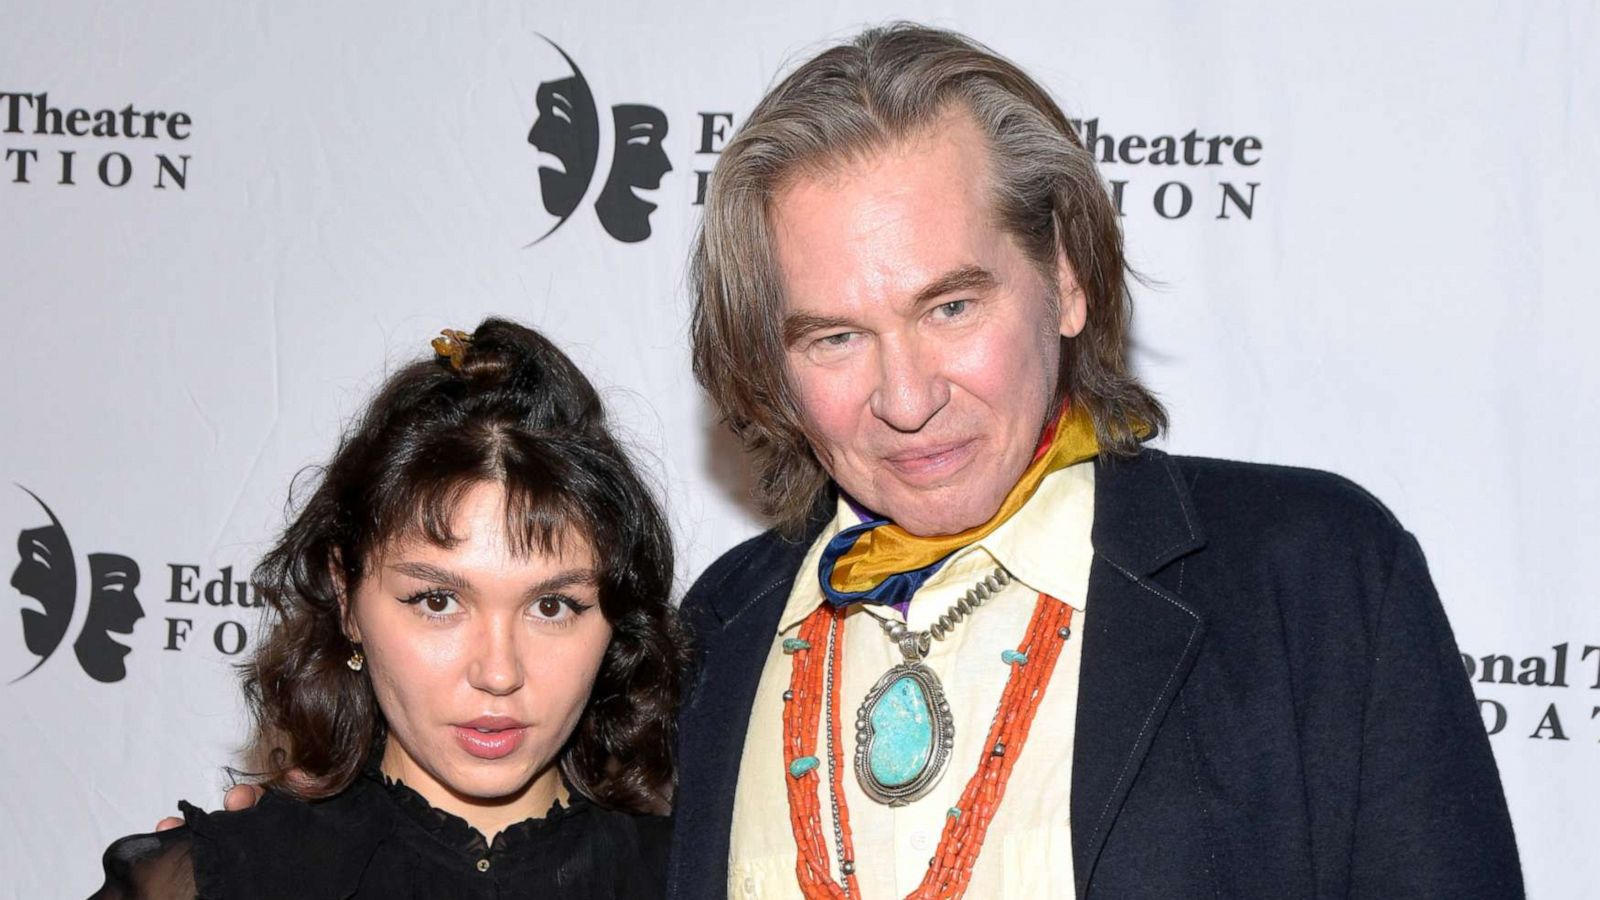 Val Kilmer Talks About Starring In New Film With Daughter Top Gun And His Health After Cancer Gma